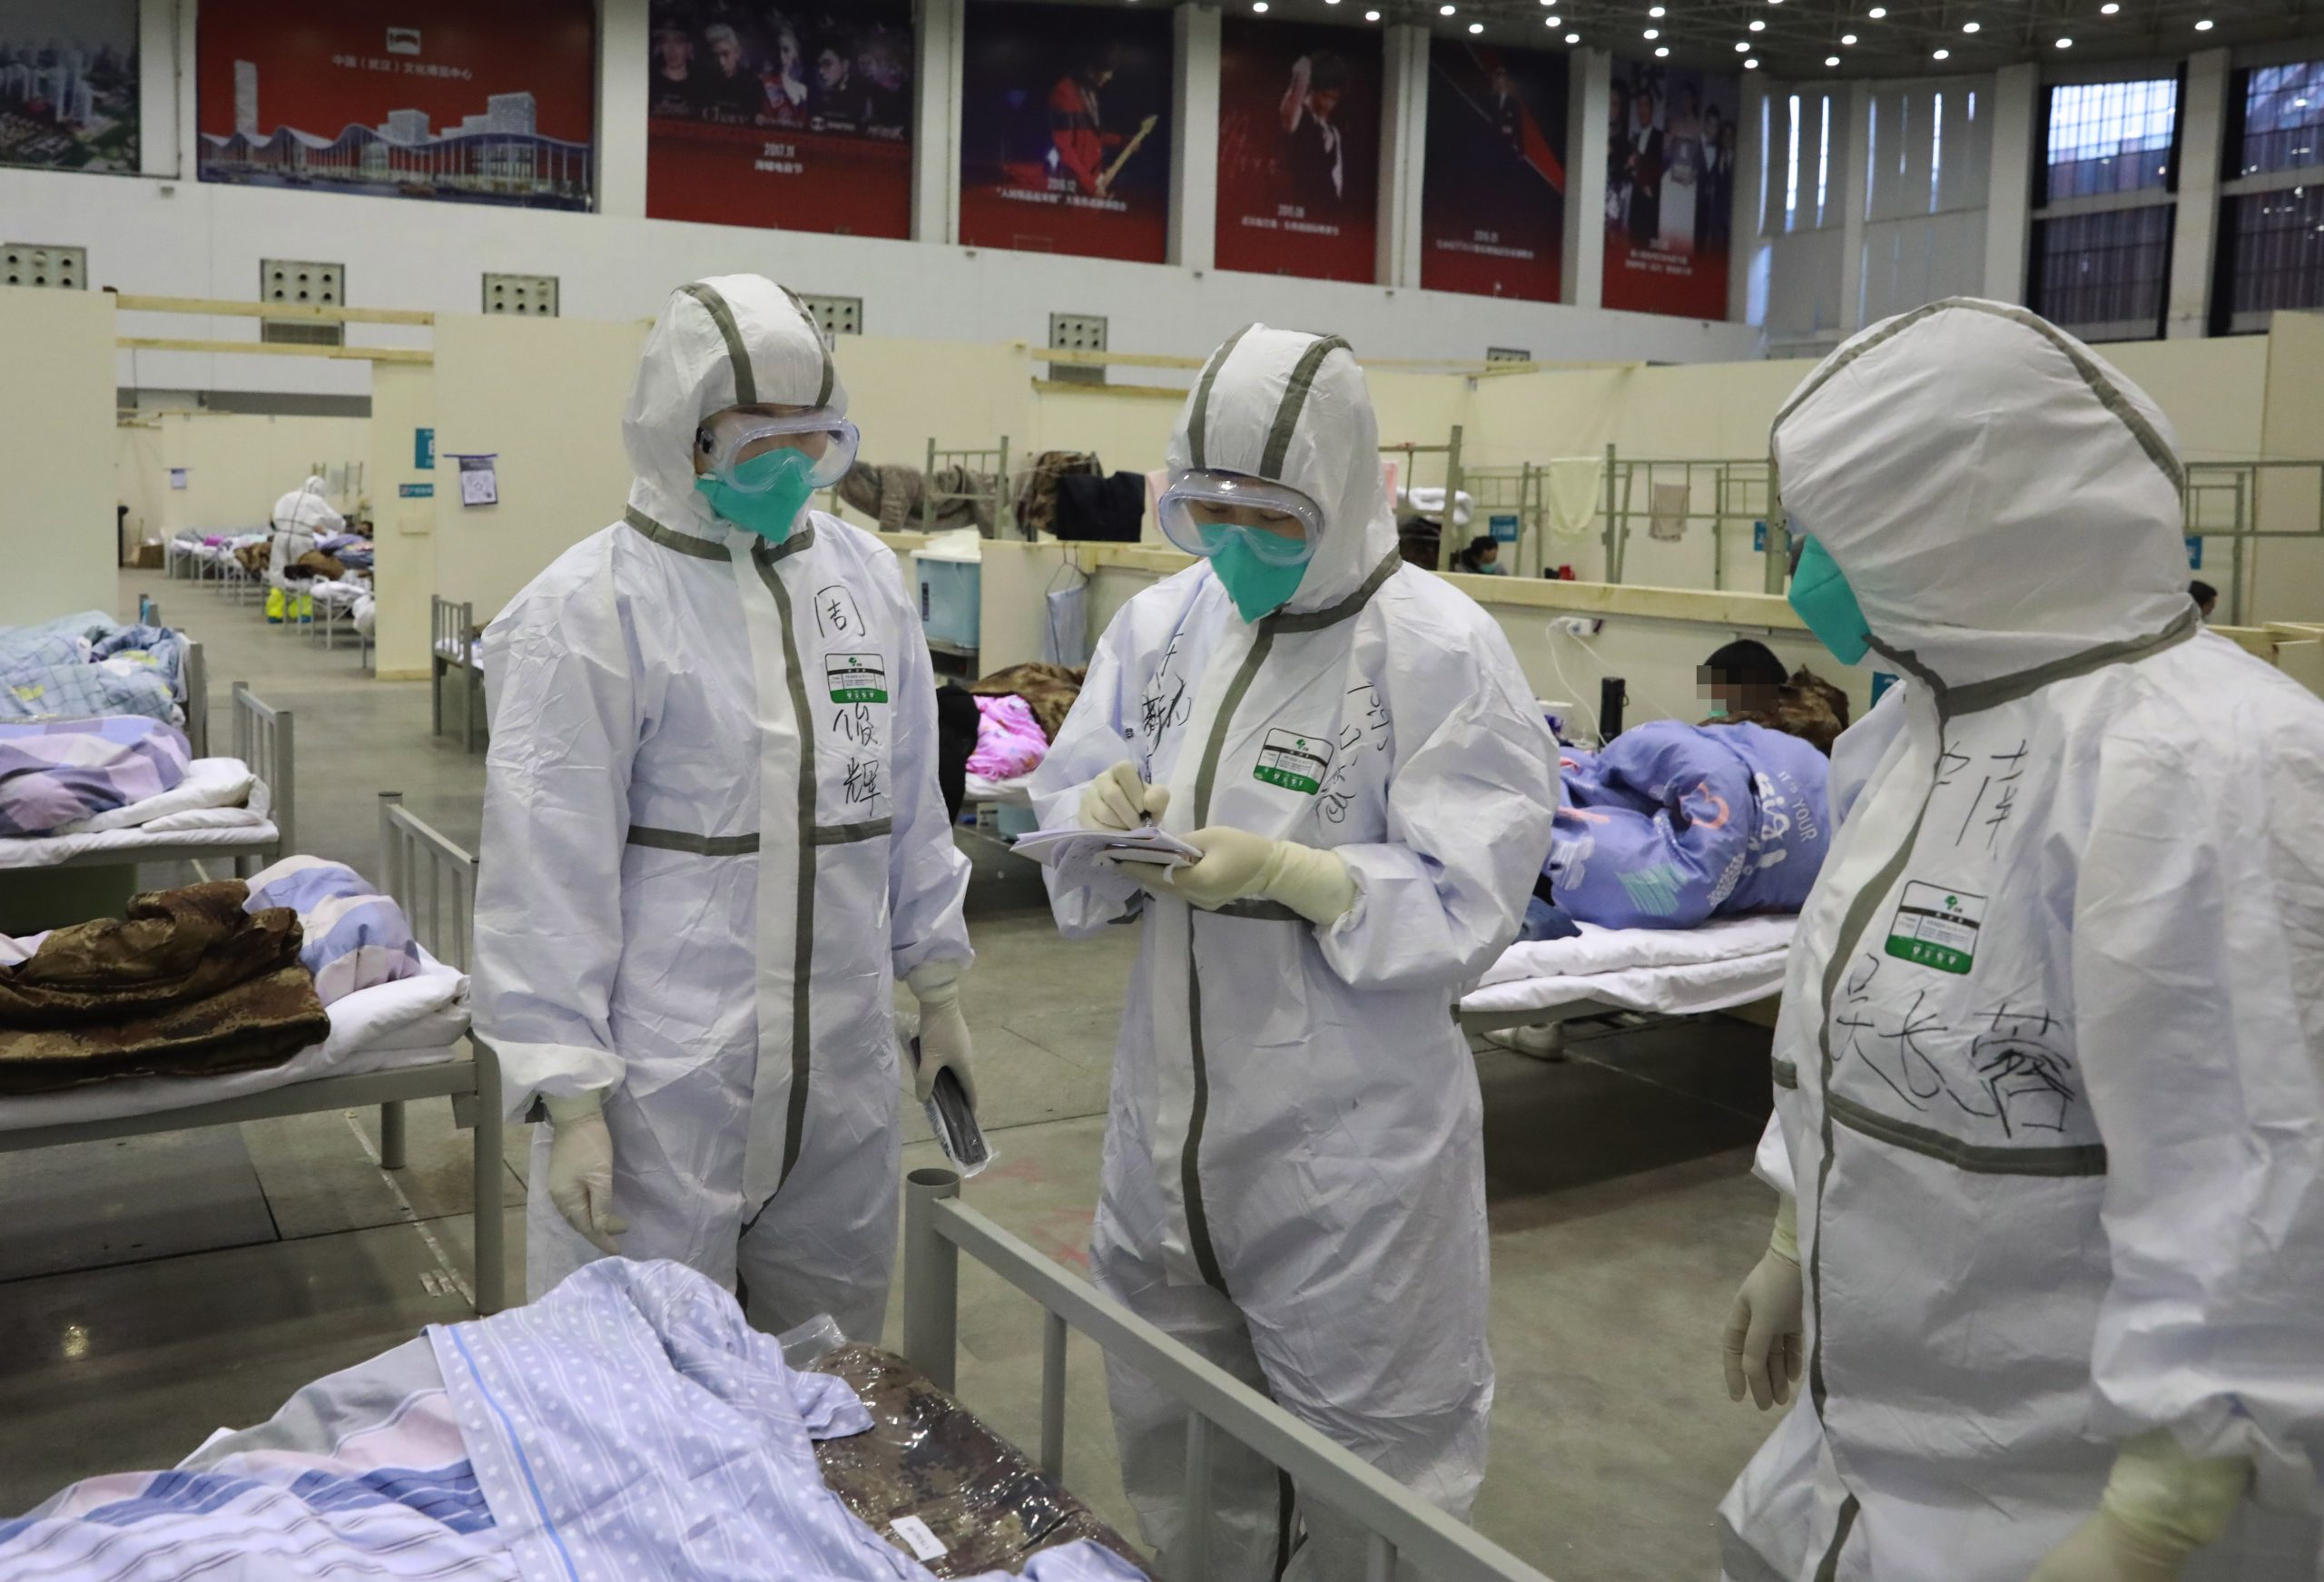 Moscow to shut down amid COVID-19 pandemic